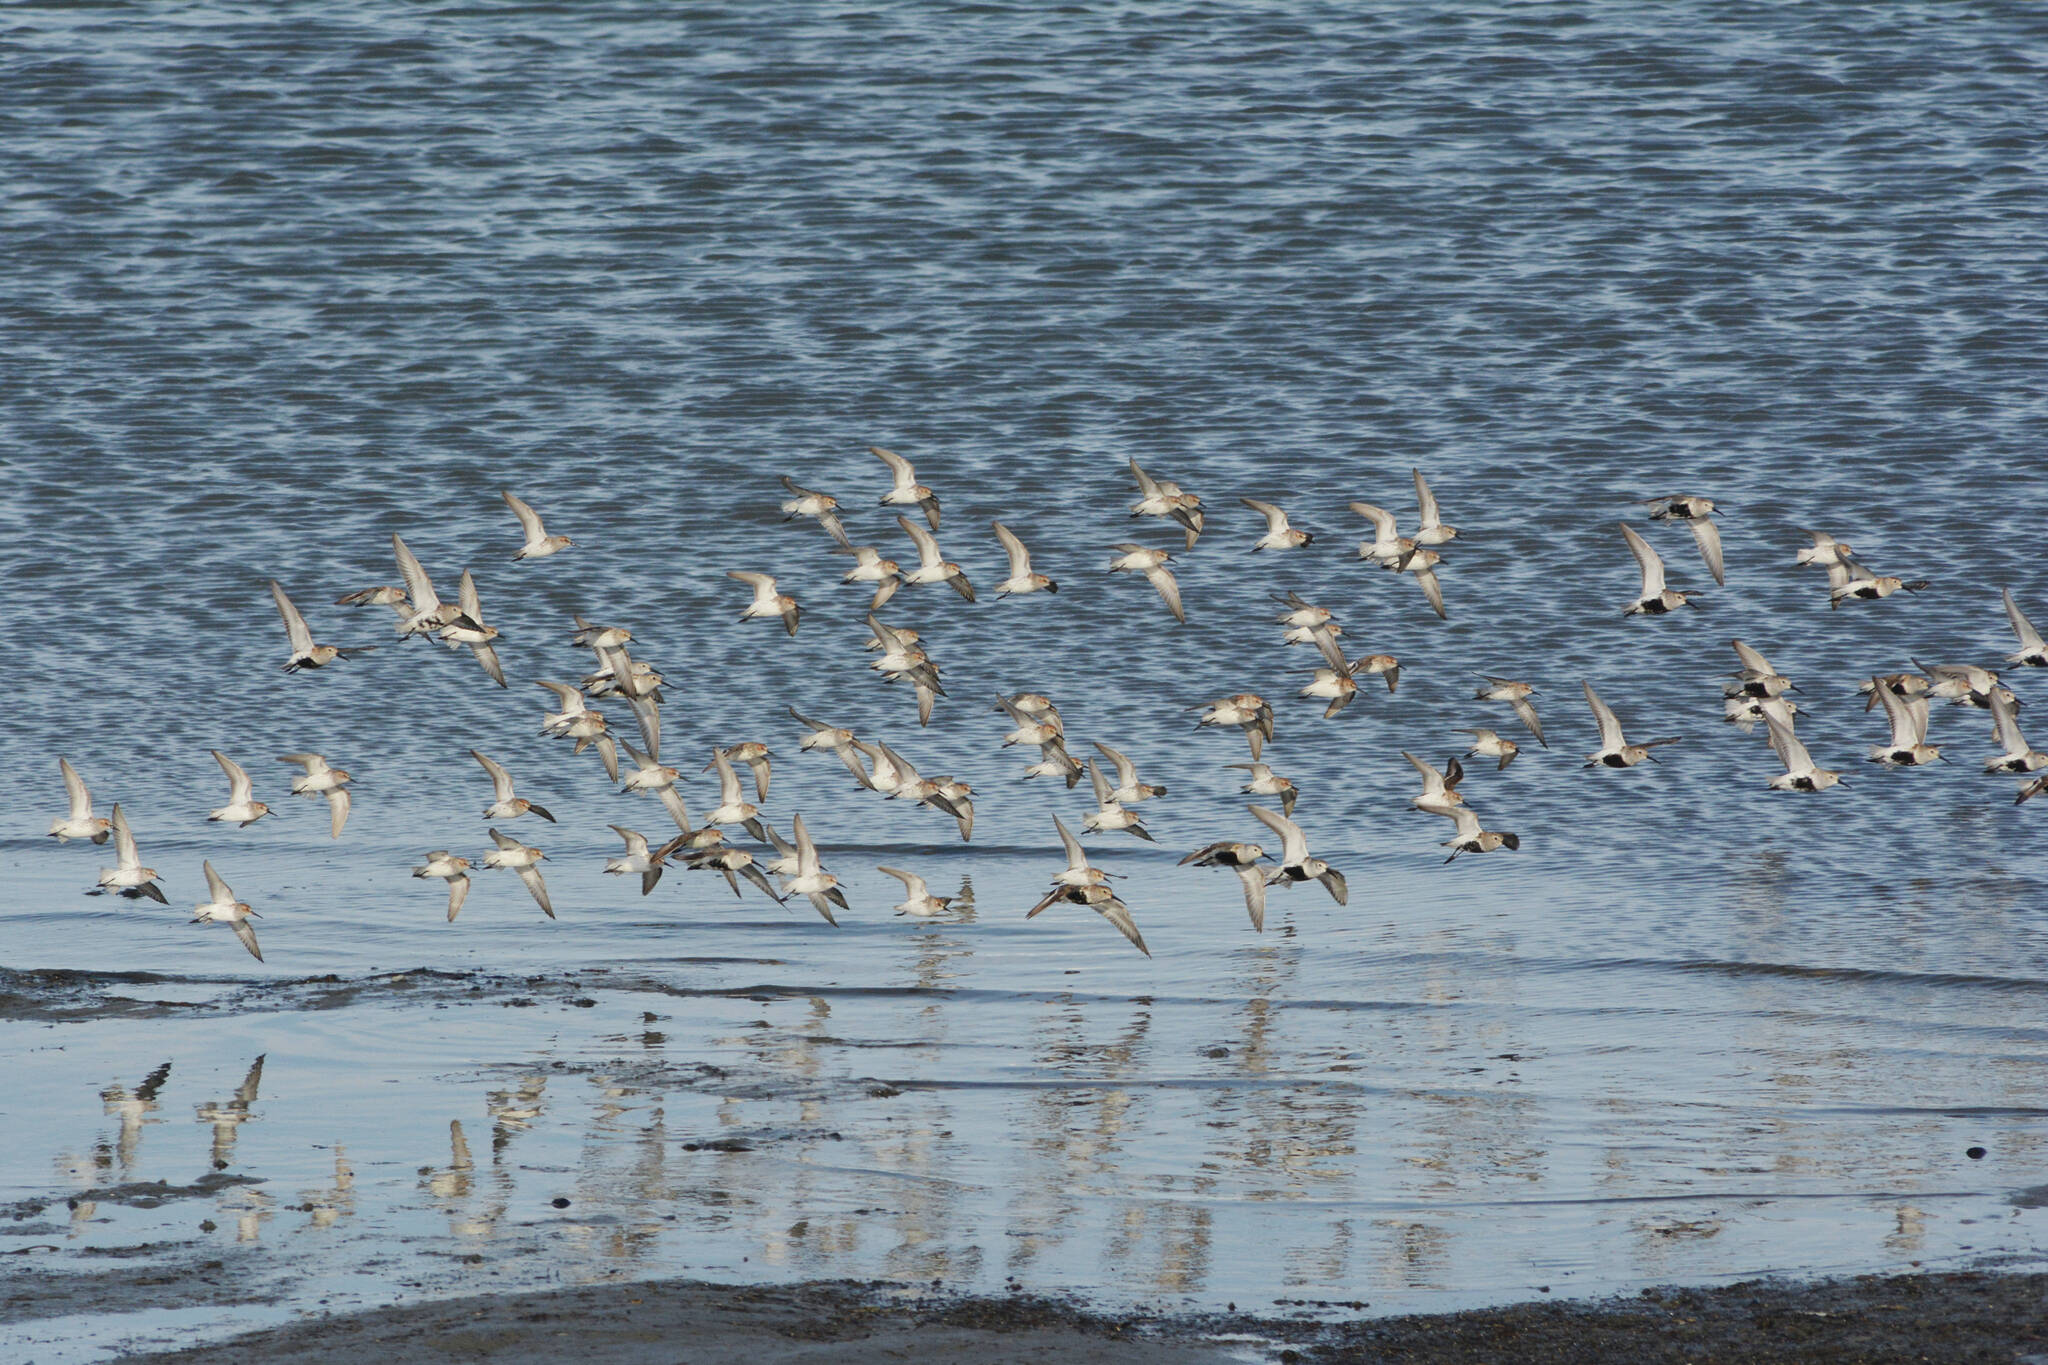 Shorebirds fly on Saturday, May 1, 2021, at Mud Bay near the Homer Spit in Homer, Alaska. The birds were one of several species of shorebirds seen in Mud Bay over the weekend that included bar-tailed godwits, western sandpipers, dunlins, long-billed dowitchers and Pacific plovers. (Photo by Michael Armstrong/Homer News)